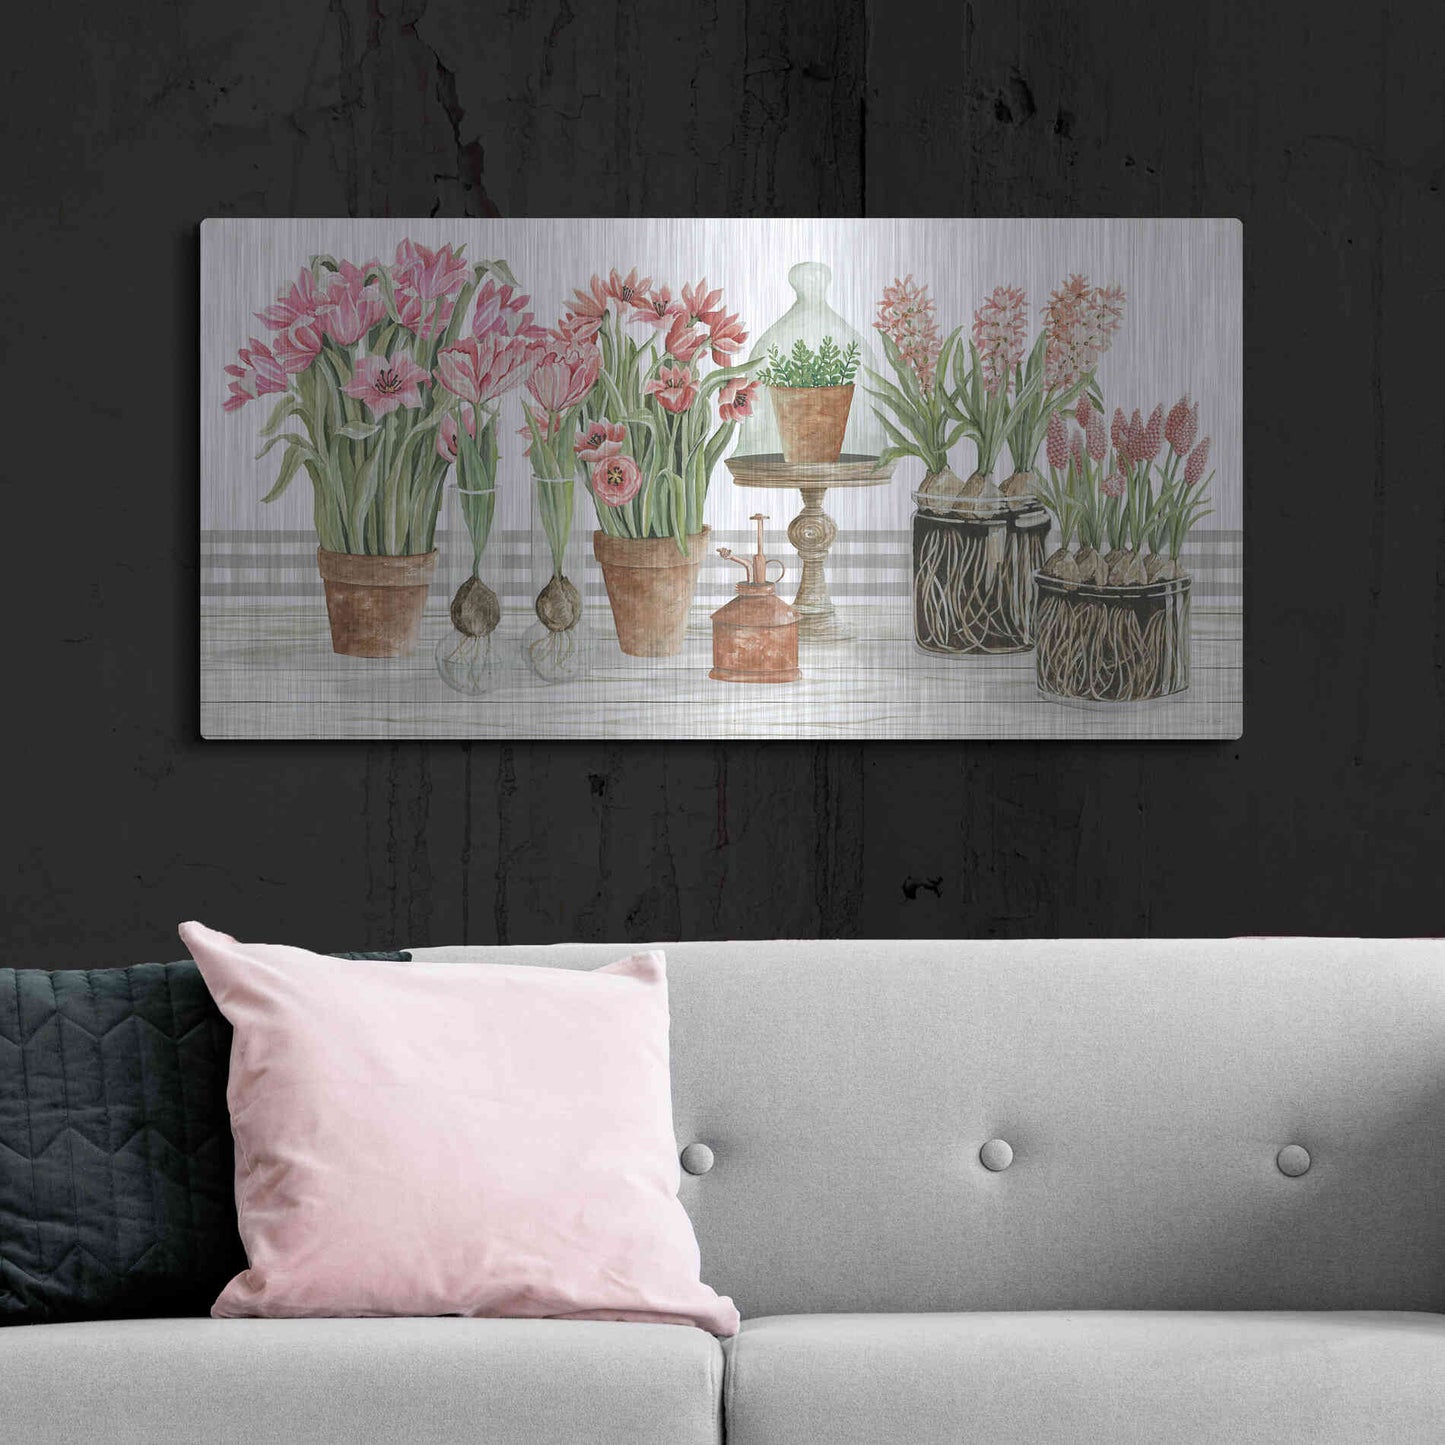 Luxe Metal Art 'Pink Spring Florals' by Cindy Jacobs, Metal Wall Art,48x24